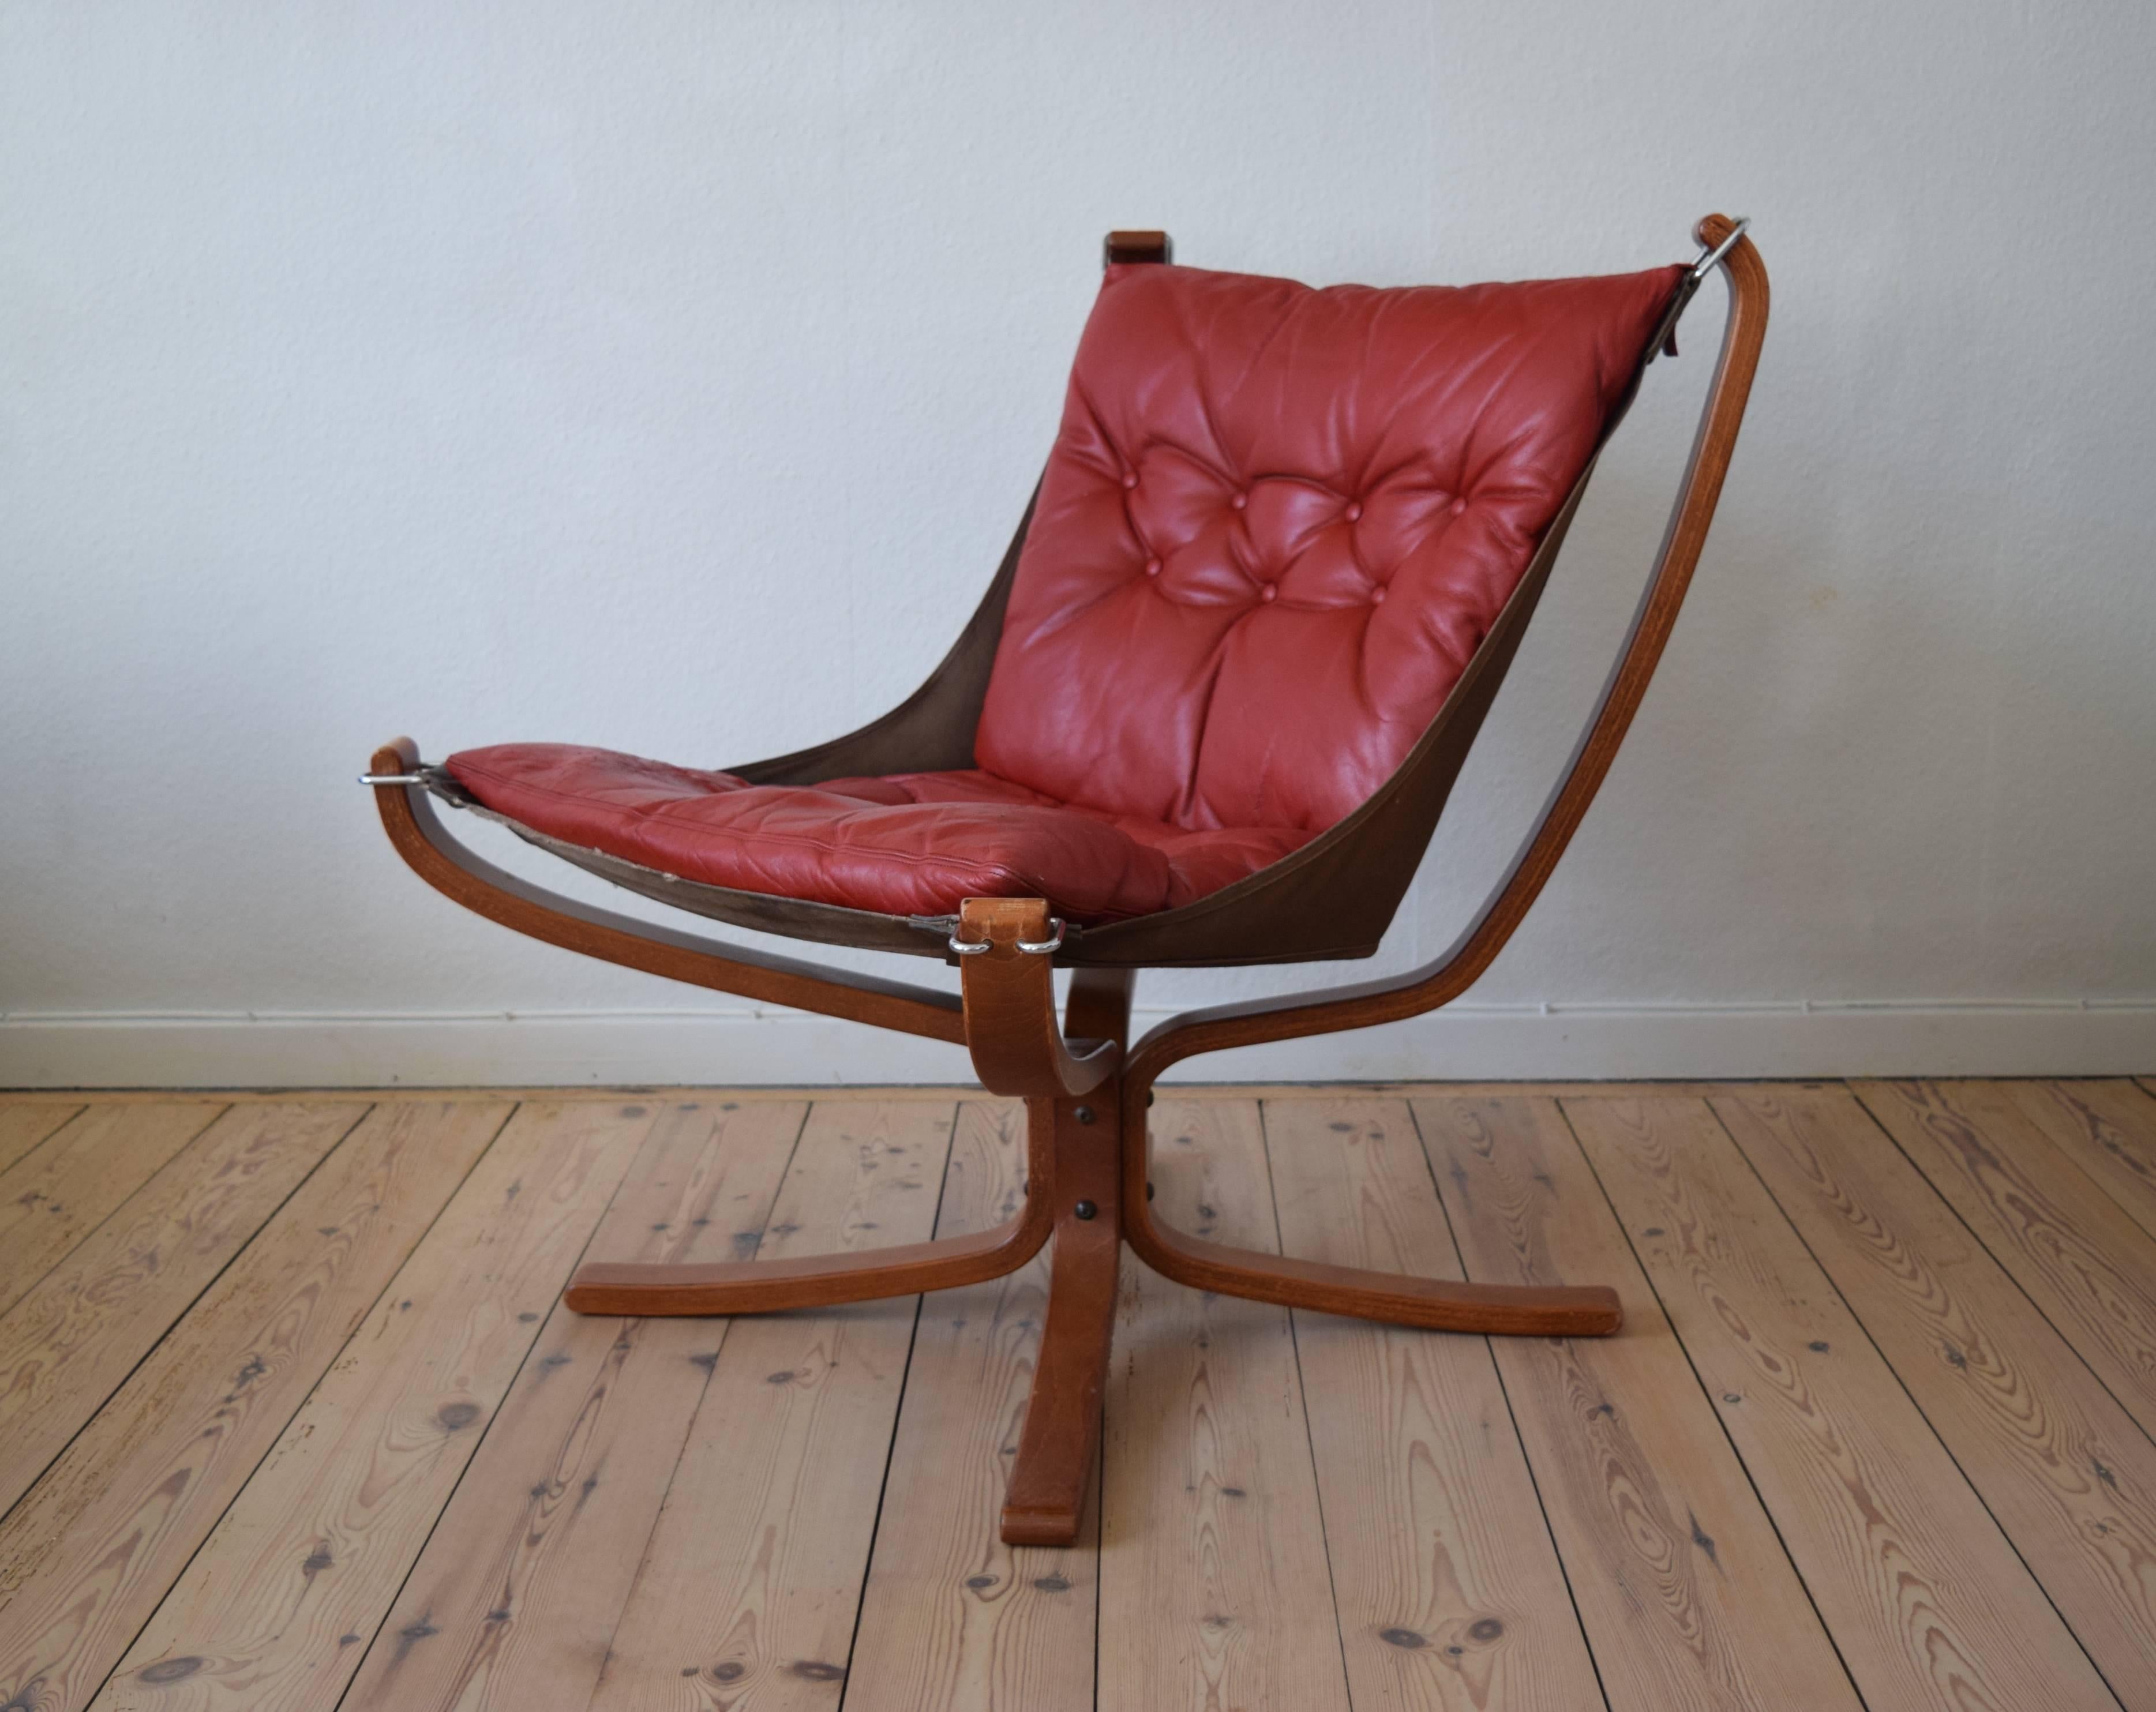 A low back falcon chair designed by Sigurd Ressell and manufactured in Denmark in the 1970s. The chair features a bent beechwood frame, with a red leather cushion.